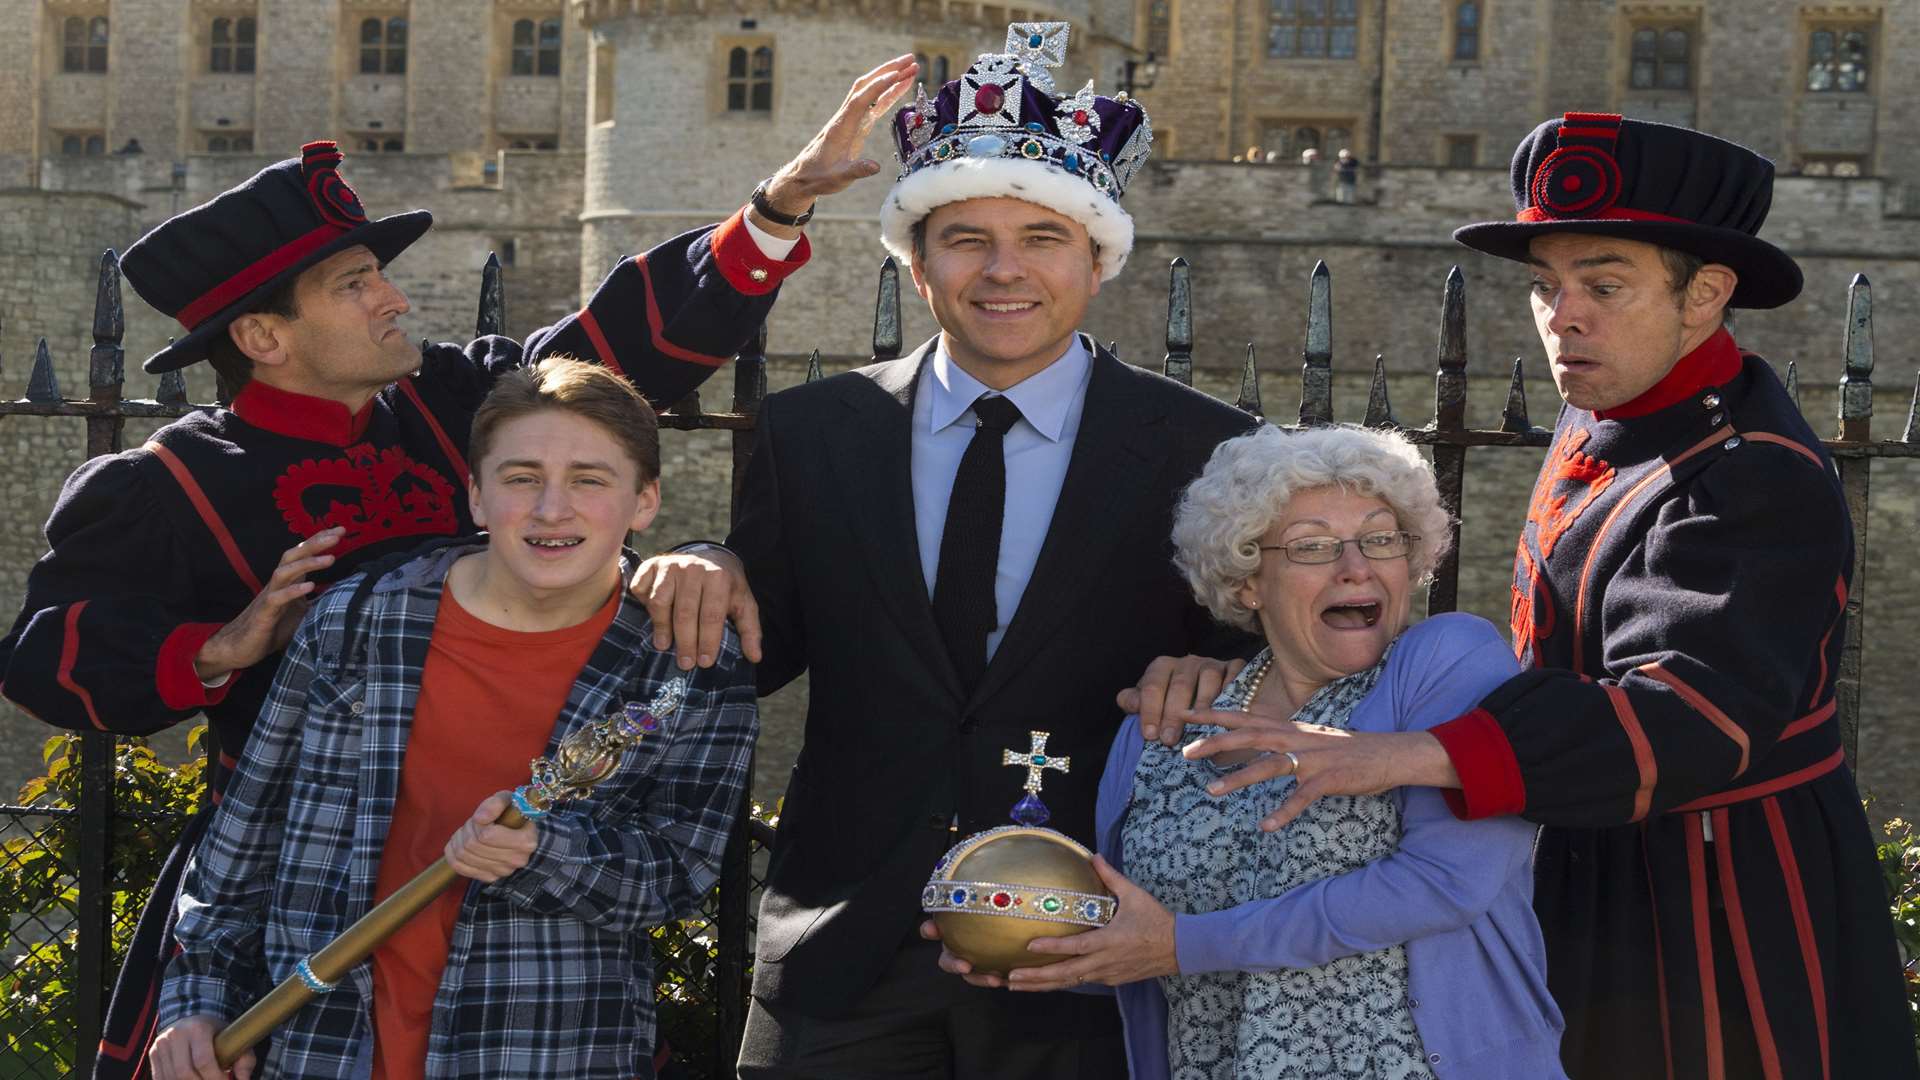 David Walliams and the cast of Gangsta Granny, Picture courtesy of Ray Tang/REX Shutterstock